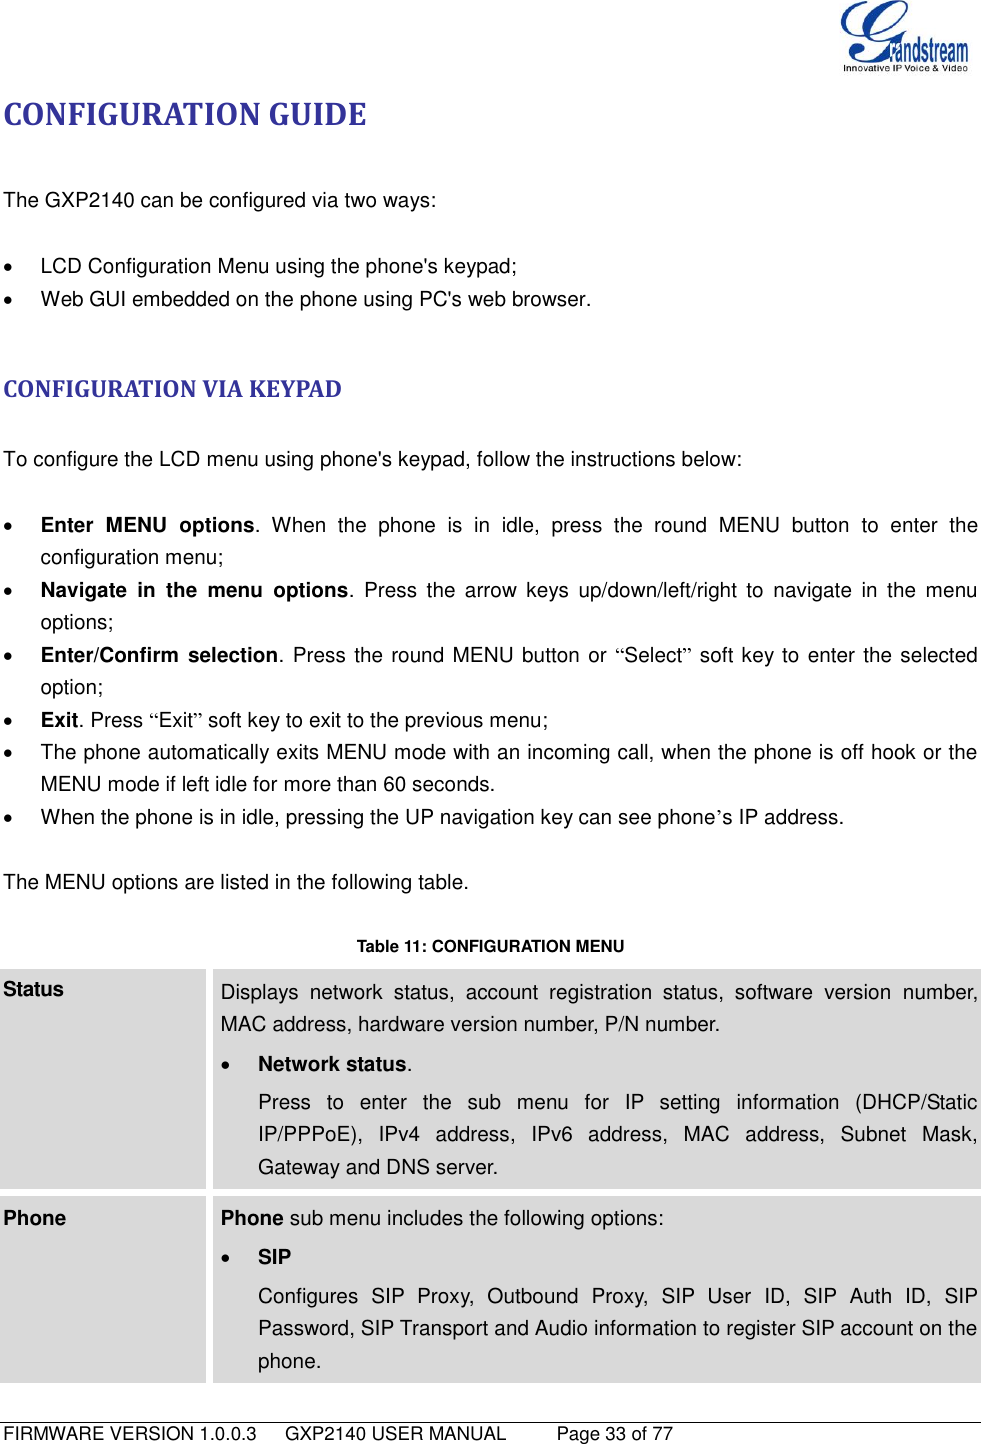   FIRMWARE VERSION 1.0.0.3   GXP2140 USER MANUAL     Page 33 of 77                                   CONFIGURATION GUIDE  The GXP2140 can be configured via two ways:    LCD Configuration Menu using the phone&apos;s keypad;   Web GUI embedded on the phone using PC&apos;s web browser.  CONFIGURATION VIA KEYPAD  To configure the LCD menu using phone&apos;s keypad, follow the instructions below:   Enter  MENU  options.  When  the  phone  is  in  idle,  press  the  round  MENU  button  to  enter  the configuration menu;  Navigate  in  the  menu  options.  Press  the  arrow  keys  up/down/left/right  to  navigate  in  the  menu options;  Enter/Confirm  selection. Press the round MENU button or “Select” soft key to enter the selected option;  Exit. Press “Exit” soft key to exit to the previous menu;   The phone automatically exits MENU mode with an incoming call, when the phone is off hook or the MENU mode if left idle for more than 60 seconds.   When the phone is in idle, pressing the UP navigation key can see phone’s IP address.    The MENU options are listed in the following table.  Table 11: CONFIGURATION MENU Status Displays  network  status,  account  registration  status,  software  version  number, MAC address, hardware version number, P/N number.  Network status.   Press  to  enter  the  sub  menu  for  IP  setting  information  (DHCP/Static IP/PPPoE),  IPv4  address,  IPv6  address,  MAC  address,  Subnet  Mask, Gateway and DNS server. Phone Phone sub menu includes the following options:  SIP Configures  SIP  Proxy,  Outbound  Proxy,  SIP  User  ID,  SIP  Auth  ID,  SIP Password, SIP Transport and Audio information to register SIP account on the phone. 